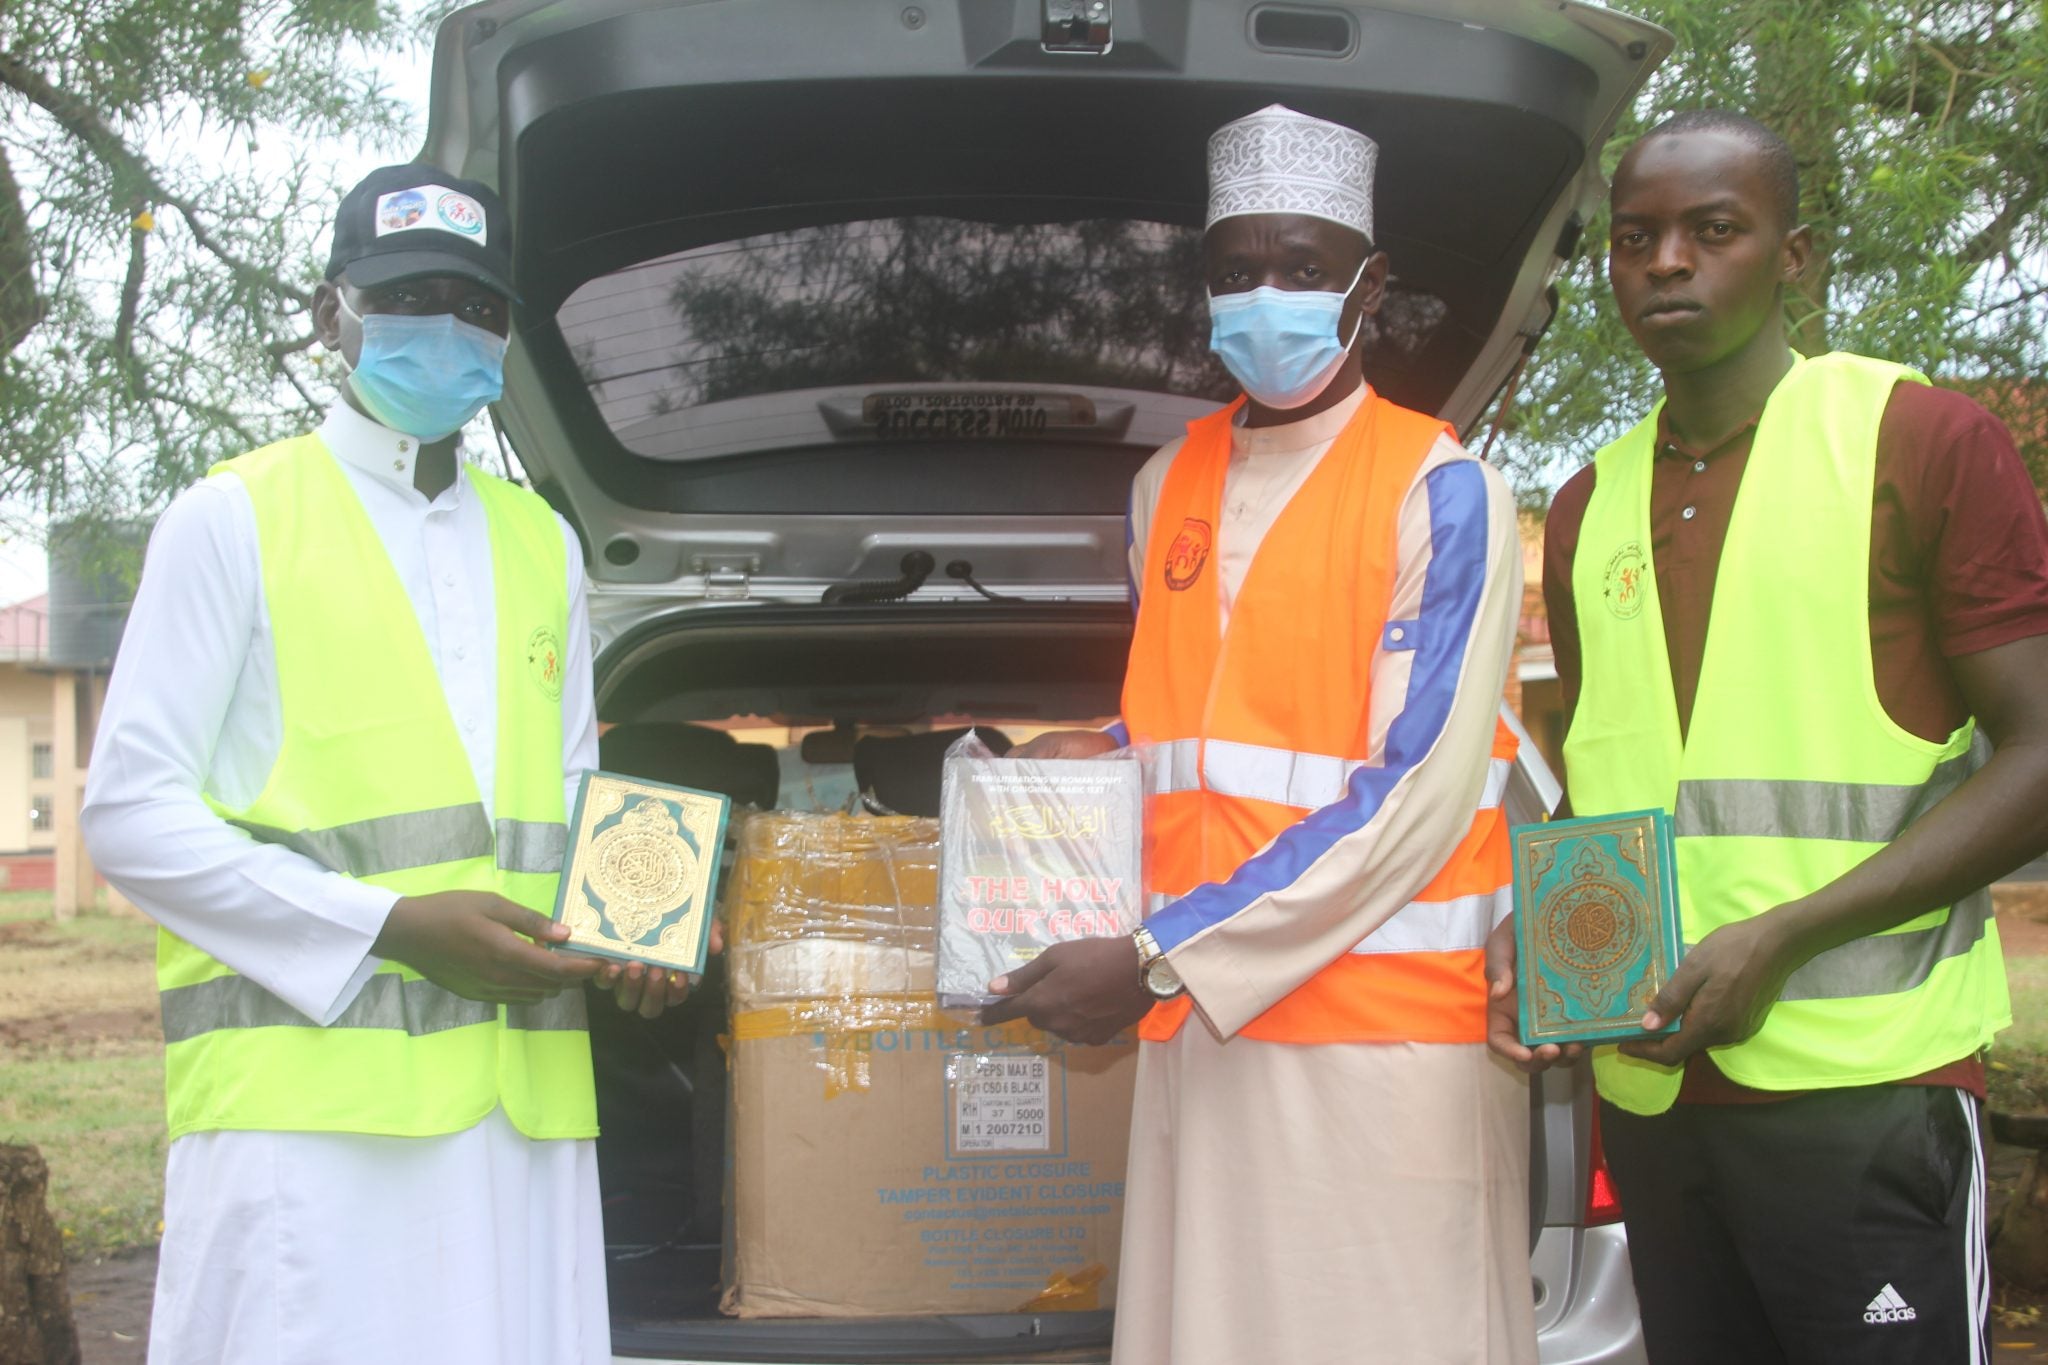 More Than 500 Copies of The Quran Distributed to Remote Villages in Uganda